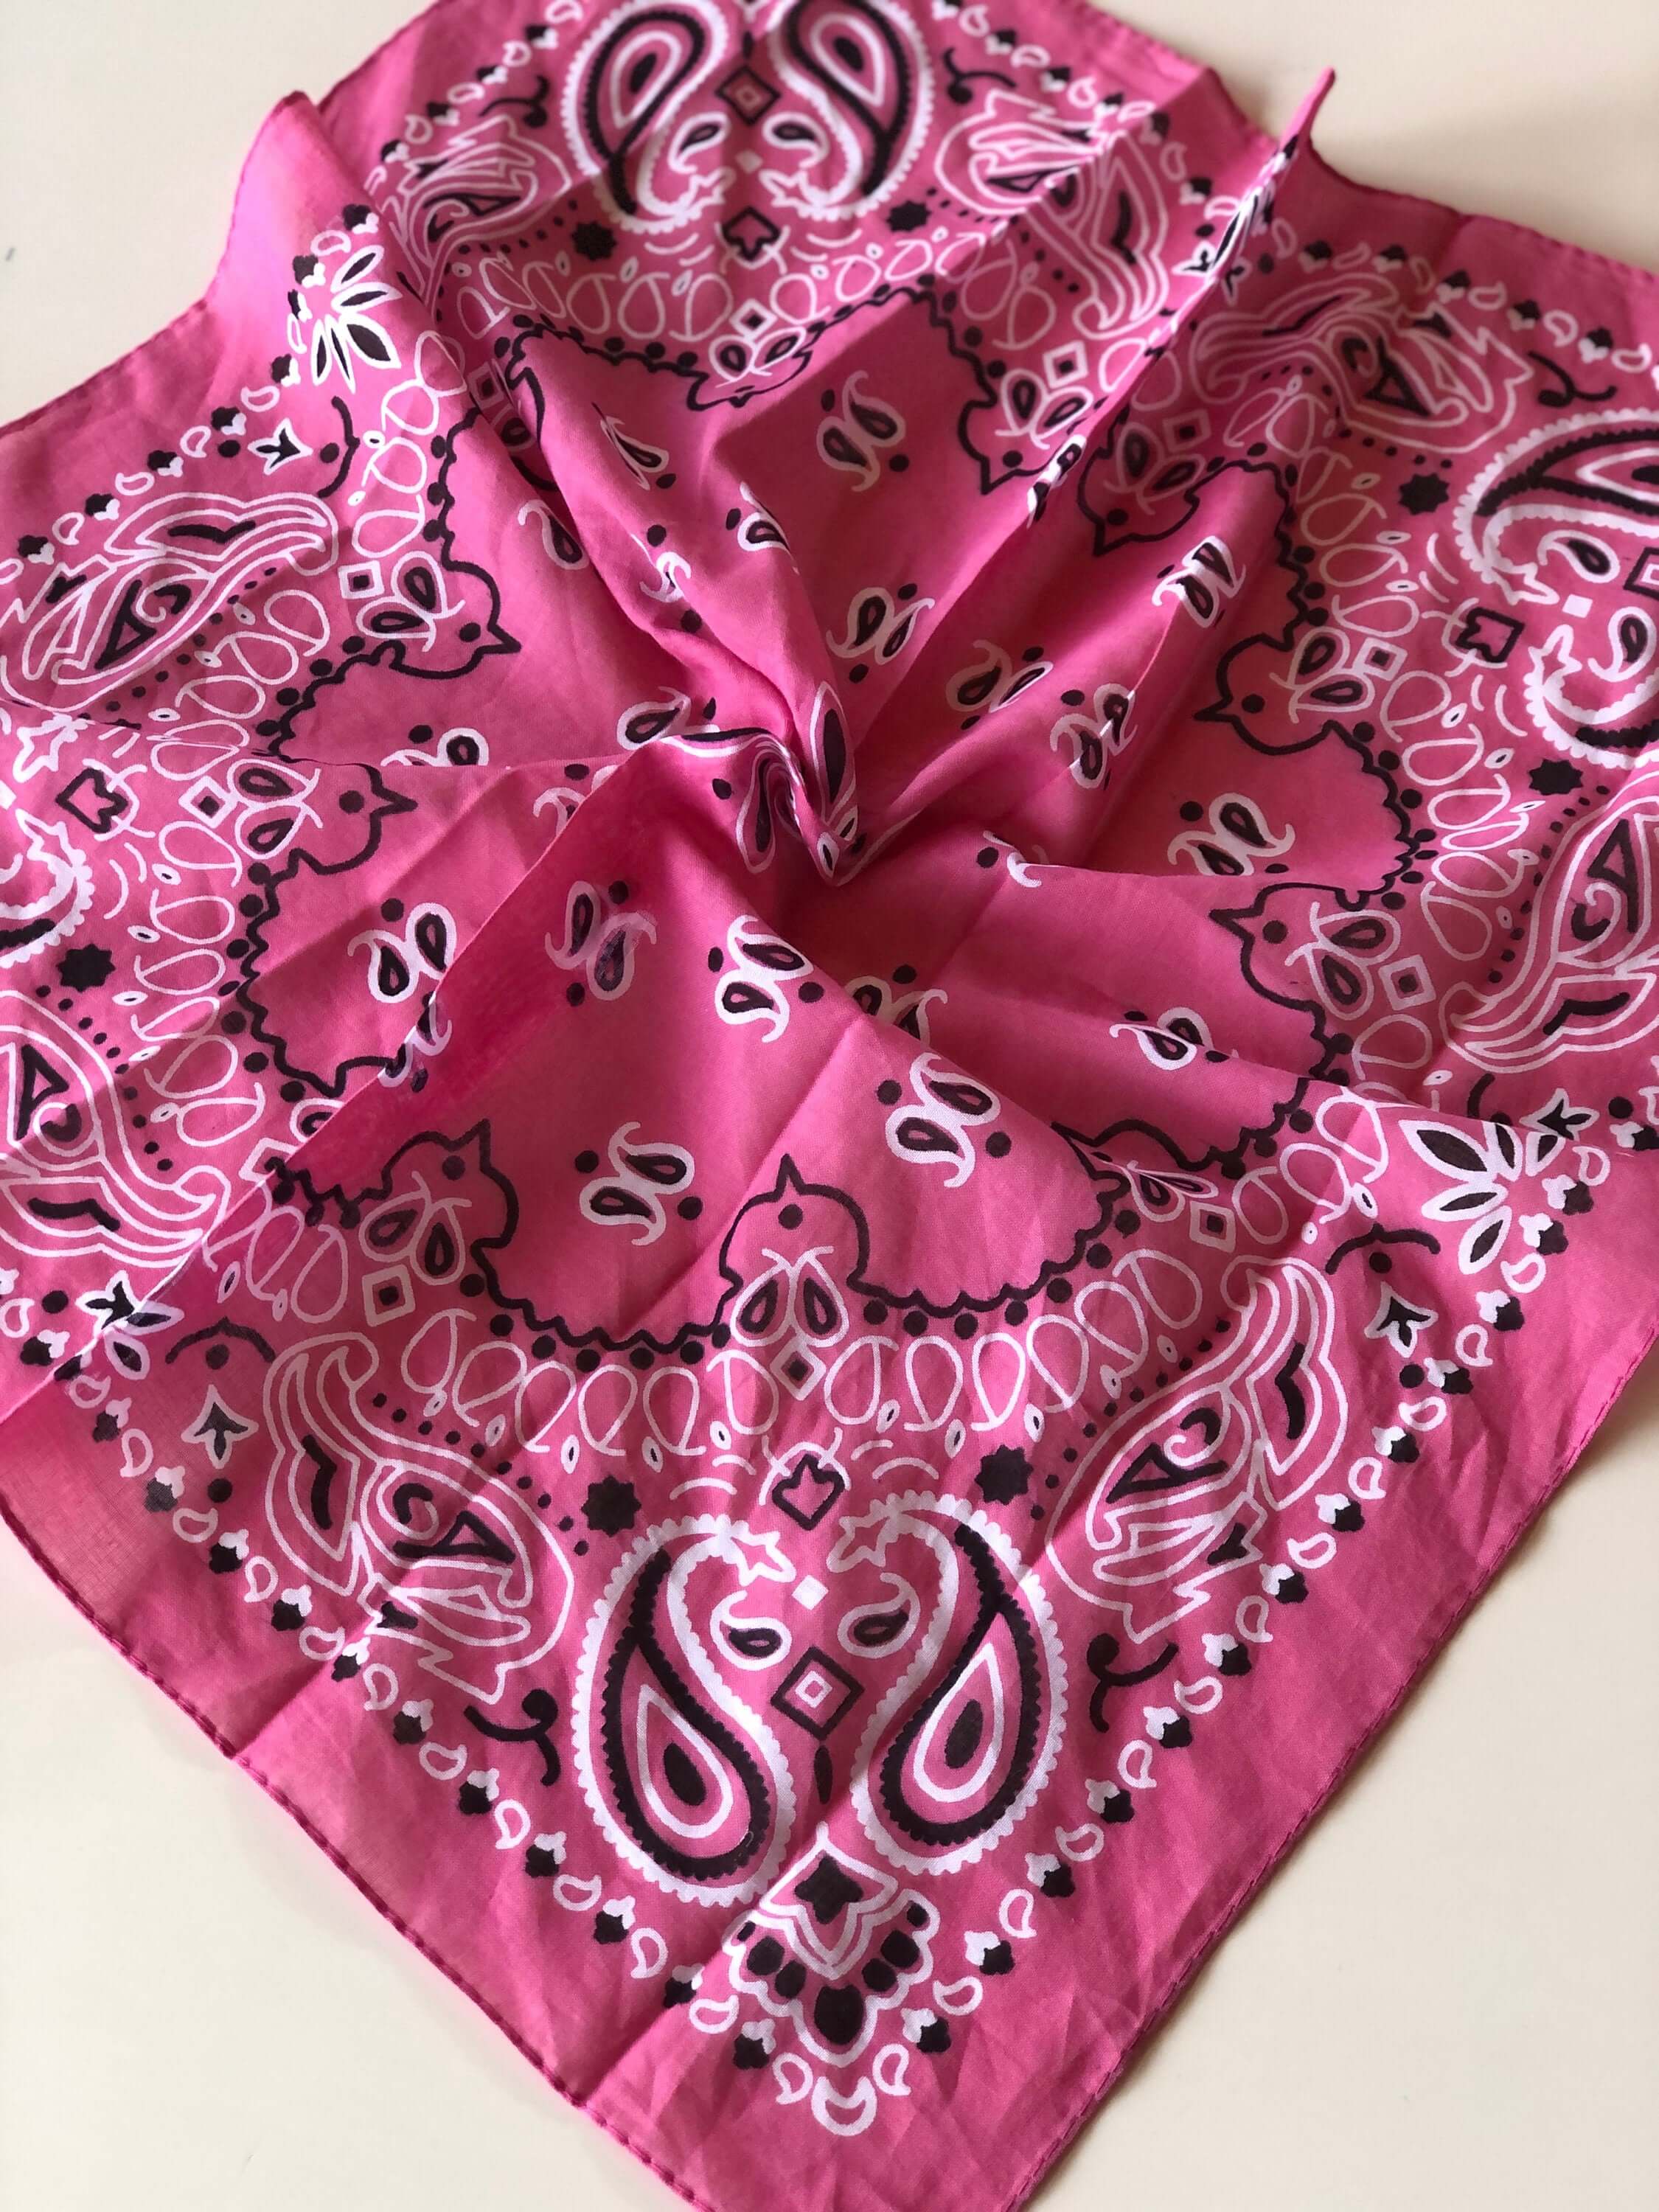 100% Cotton Scarf, Spring Scarf, Gift for Women, Head Scarf, Neck Scarf, Hair Scarf, Pink Printed Scarf Bandana